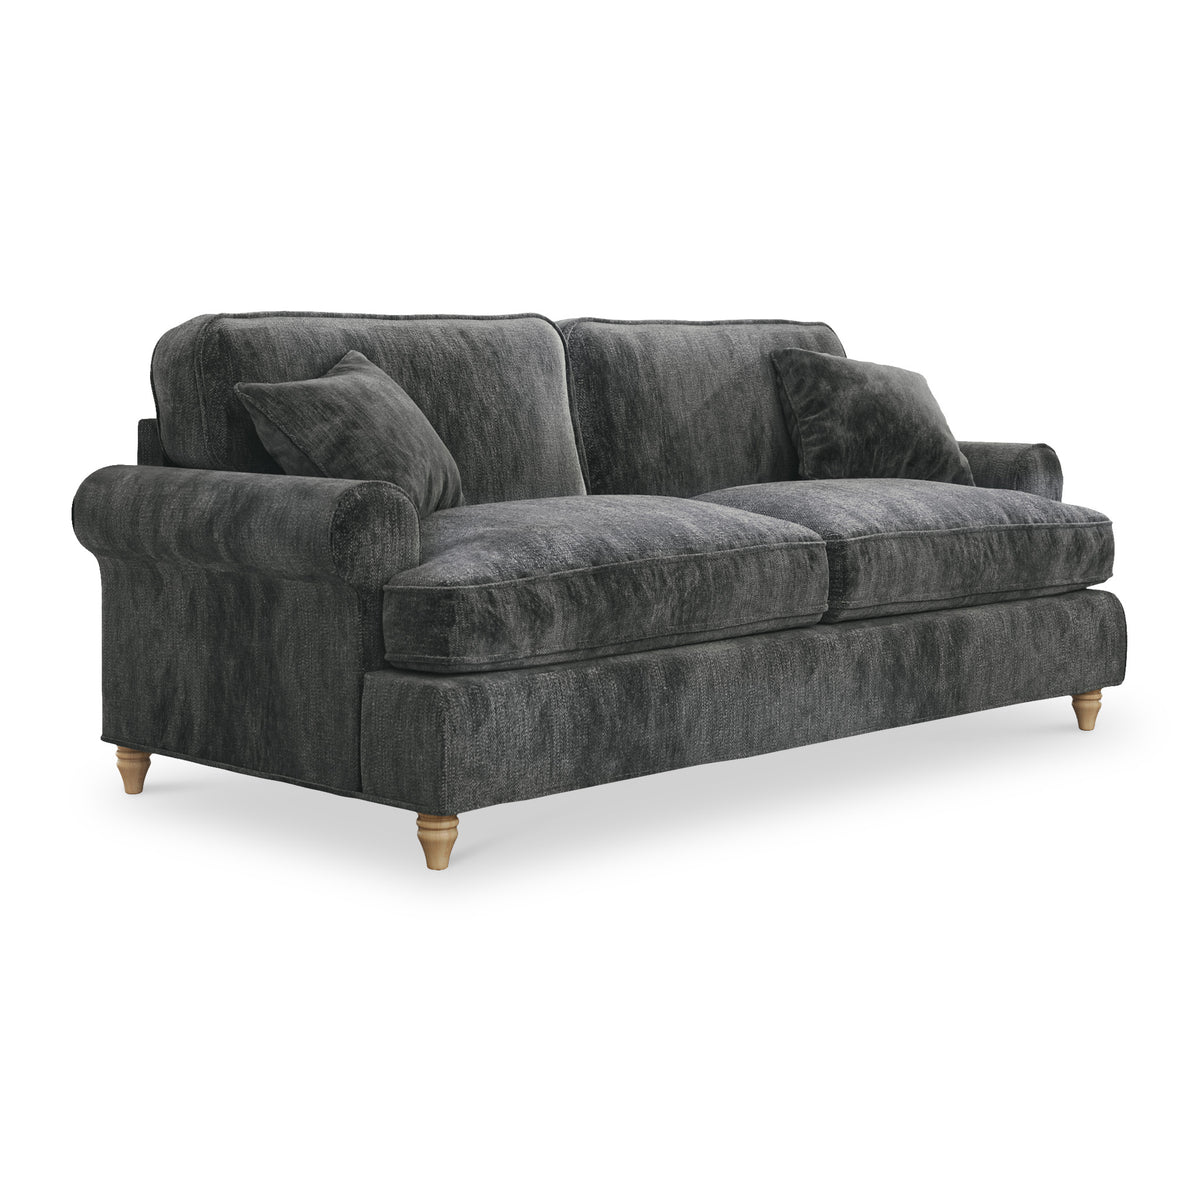 Alfie Charcoal 3 Seater Sofa from Roseland Furniture